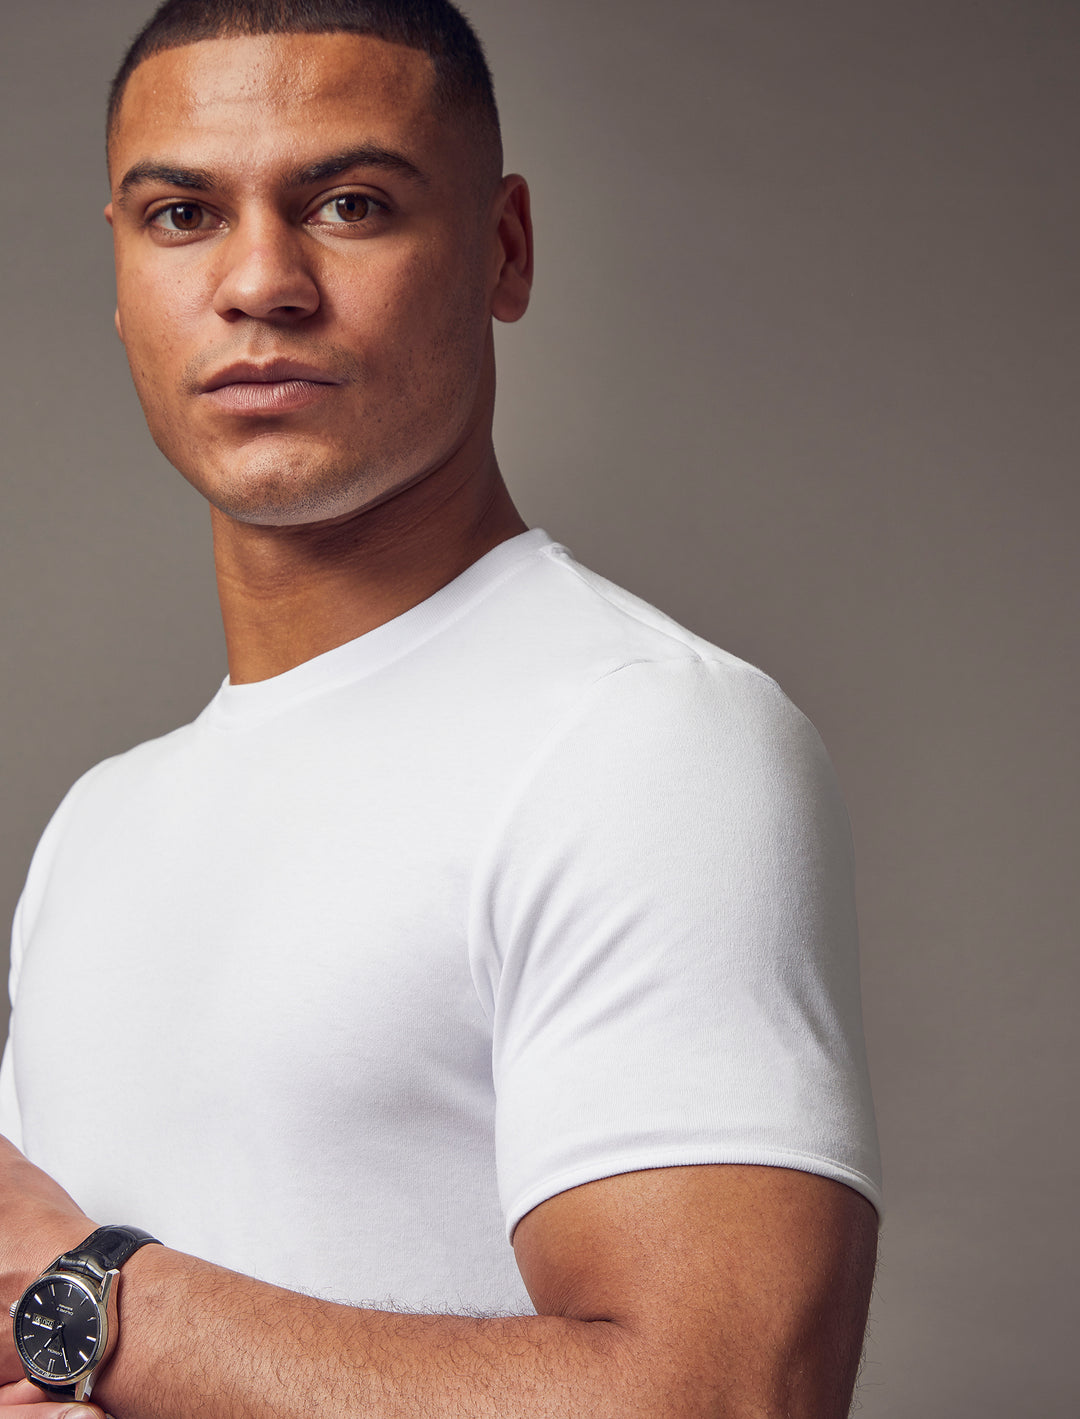 A white, tapered-fit T-shirt by Tapered Menswear, designed to showcase the muscle fit for a silhouette that is both stylish and comfortable.